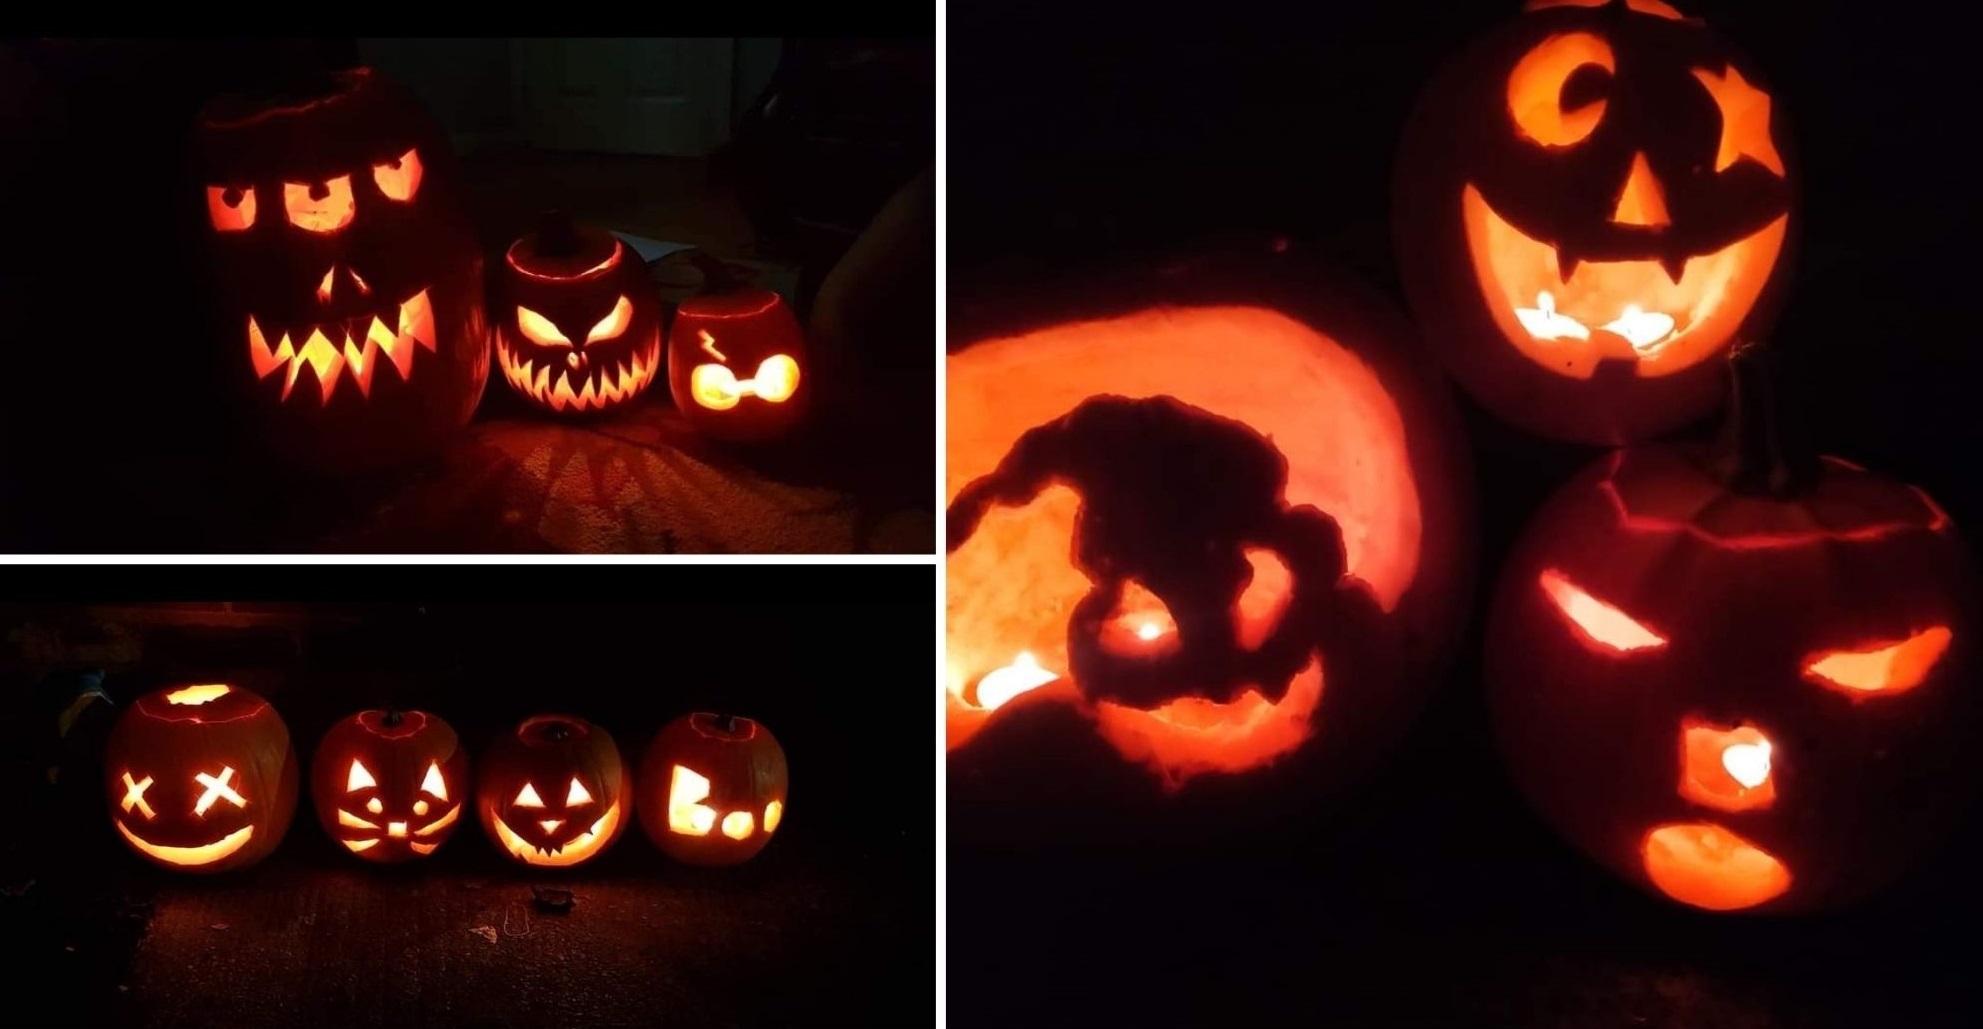 Pumpkins carved by Victoria Roberts.